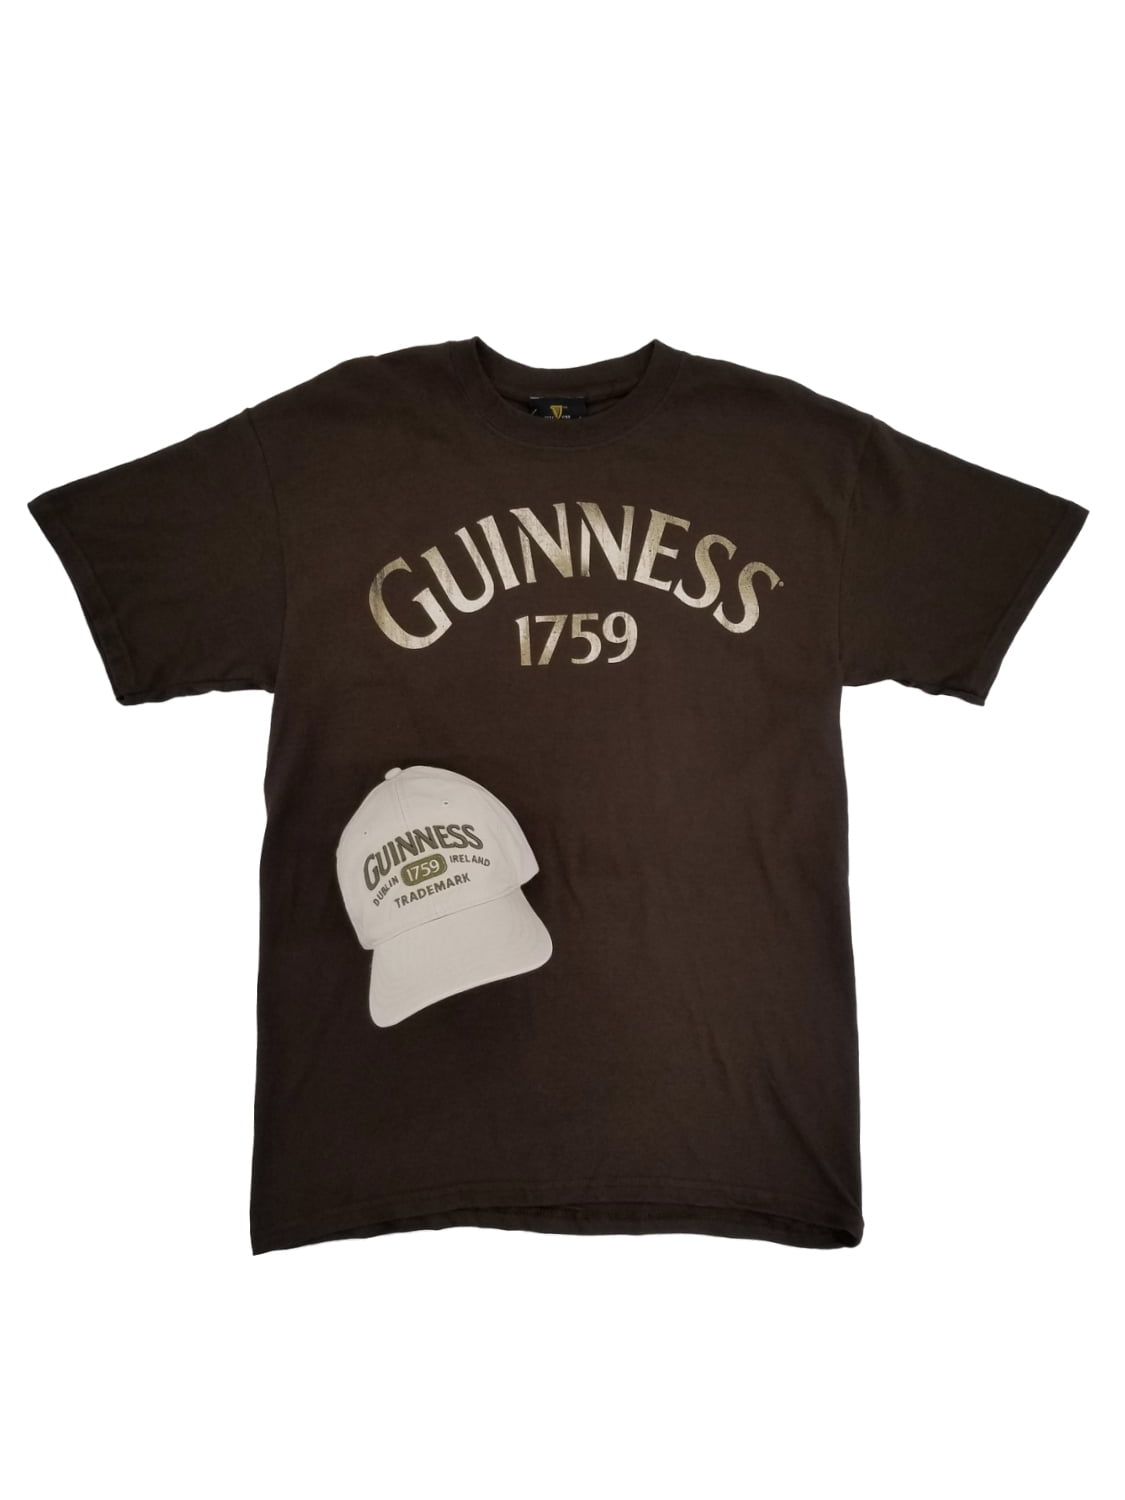 Black Guinness 1759 hat with white T shirt with Guinness extra stout 1759 NEW 